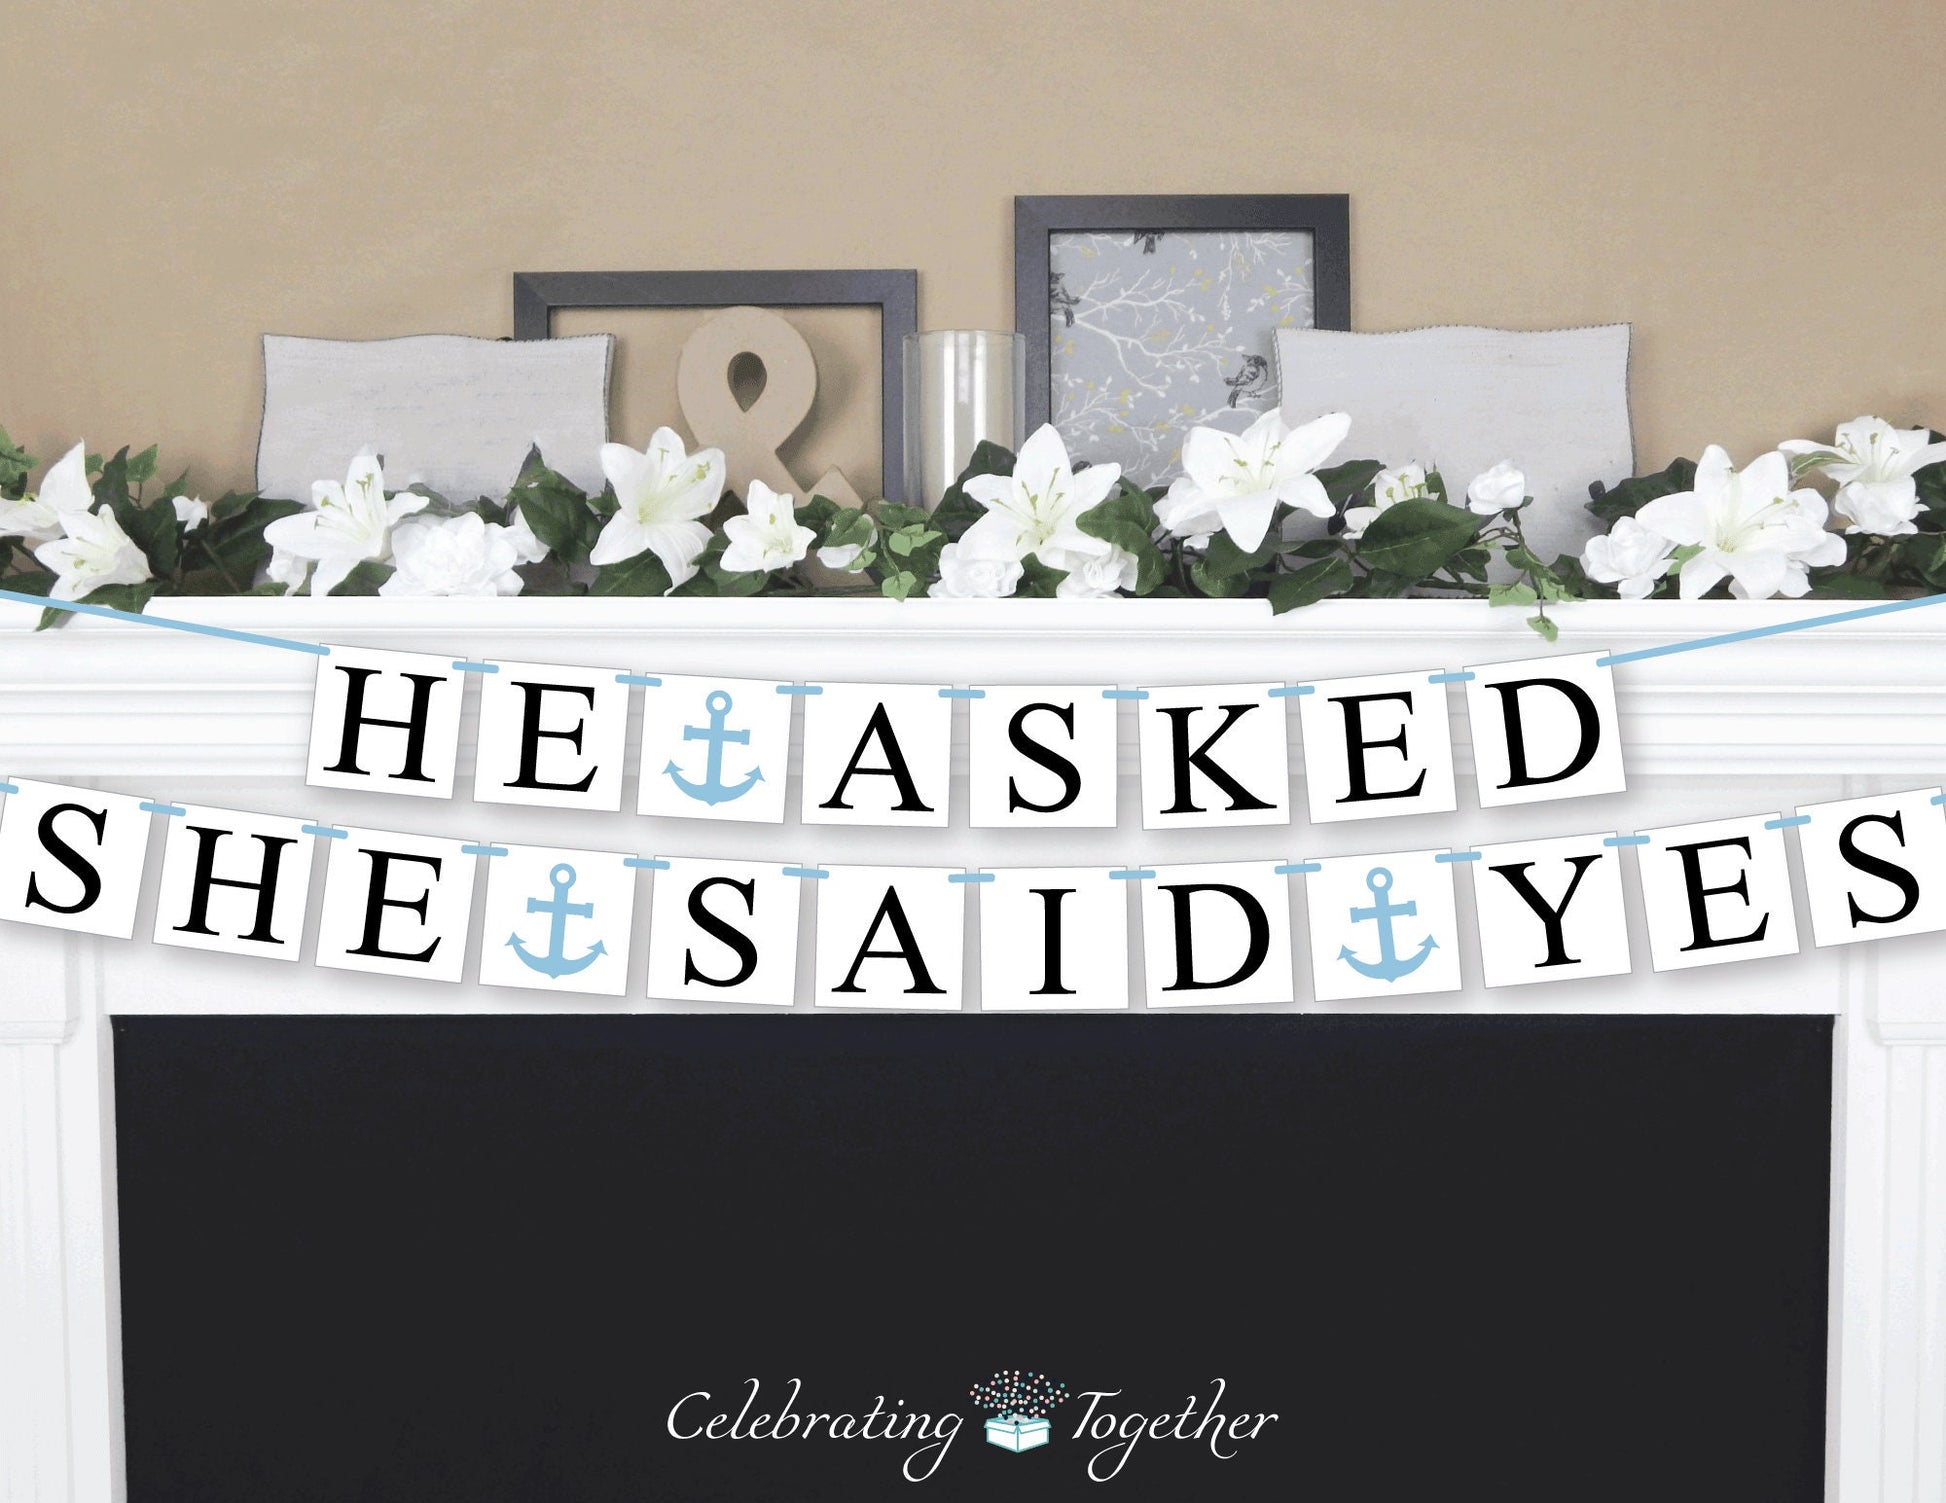 he asked she said yes banner - nautical bridal shower banner